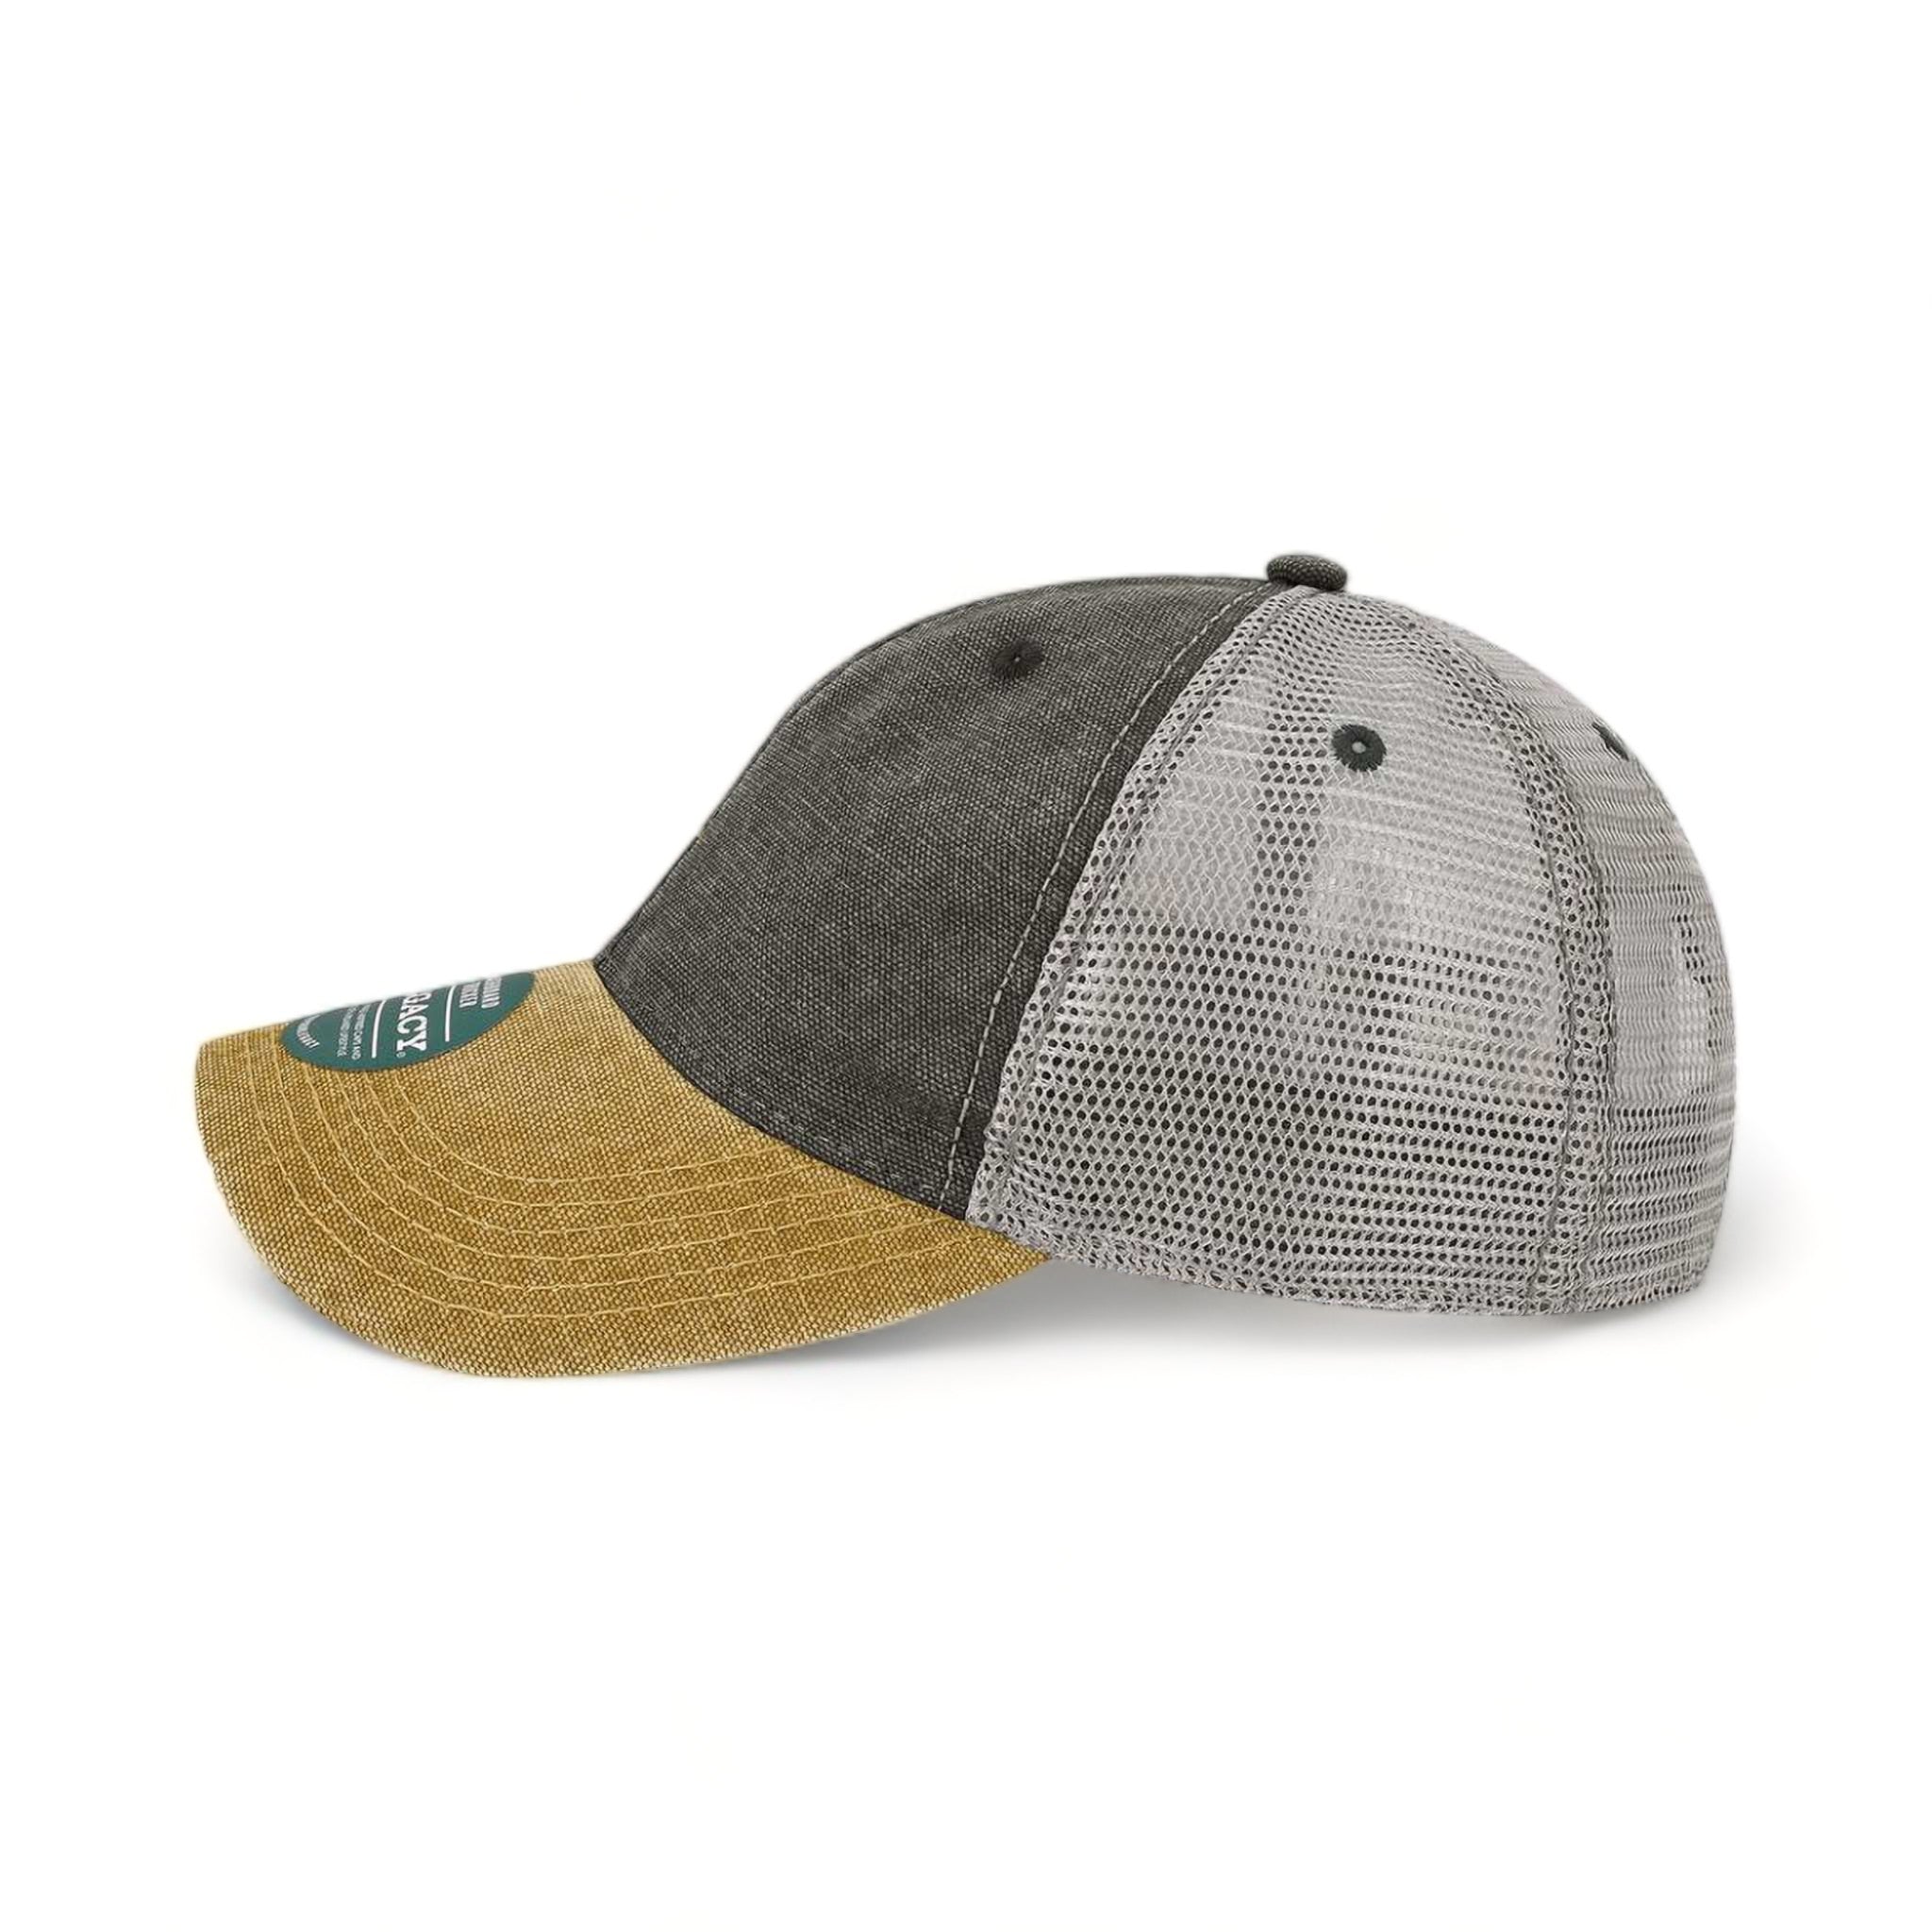 Side view of LEGACY DTA custom hat in black, camel and grey